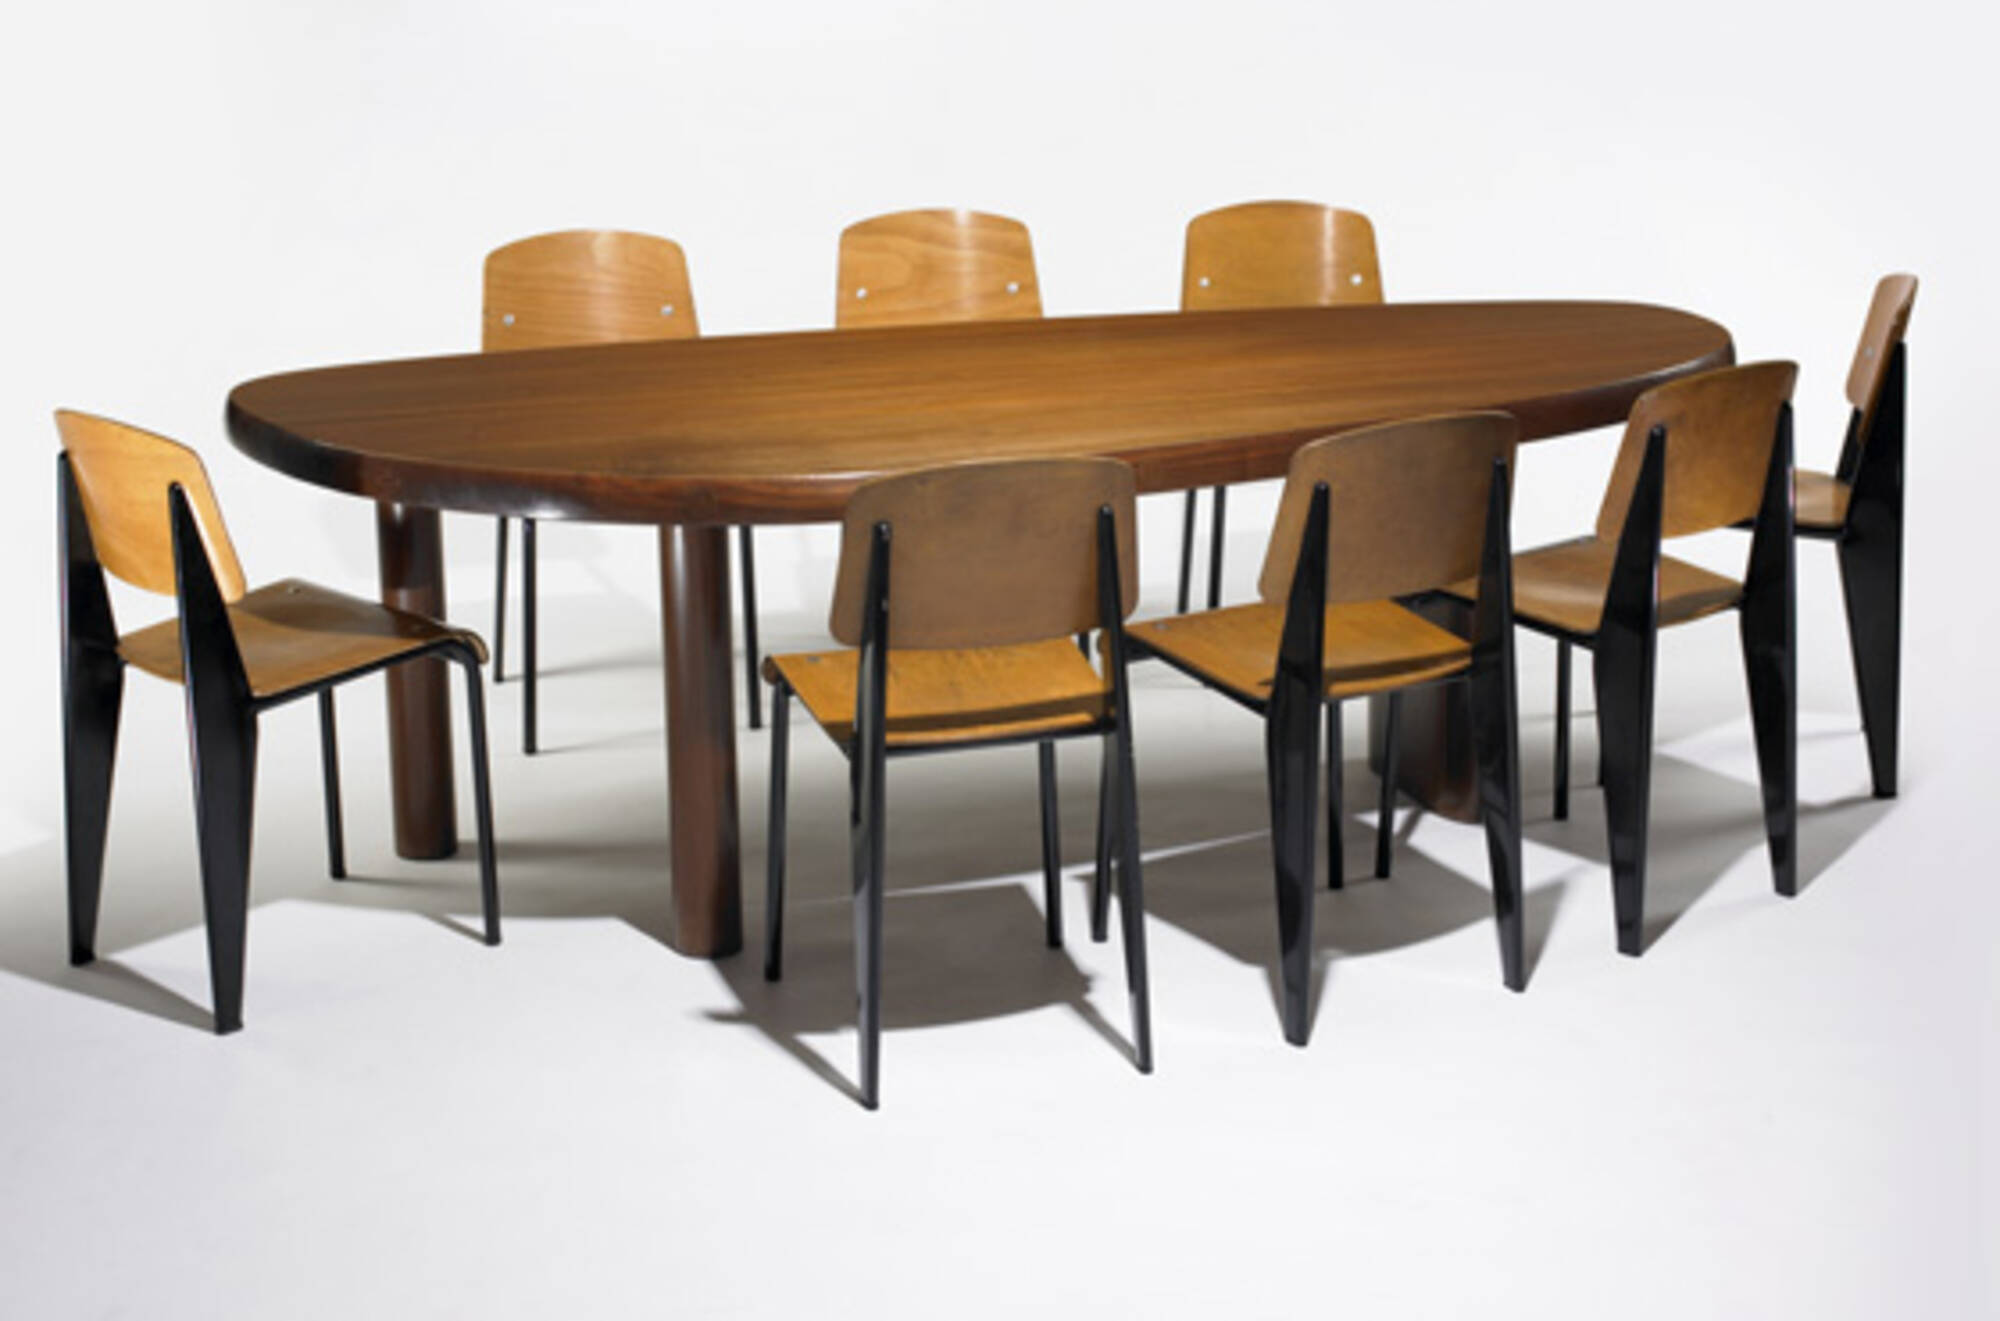 248: CHARLOTTE PERRIAND, Forme Libre dining table < Important Design (Day  1), 18 May 2008 < Auctions